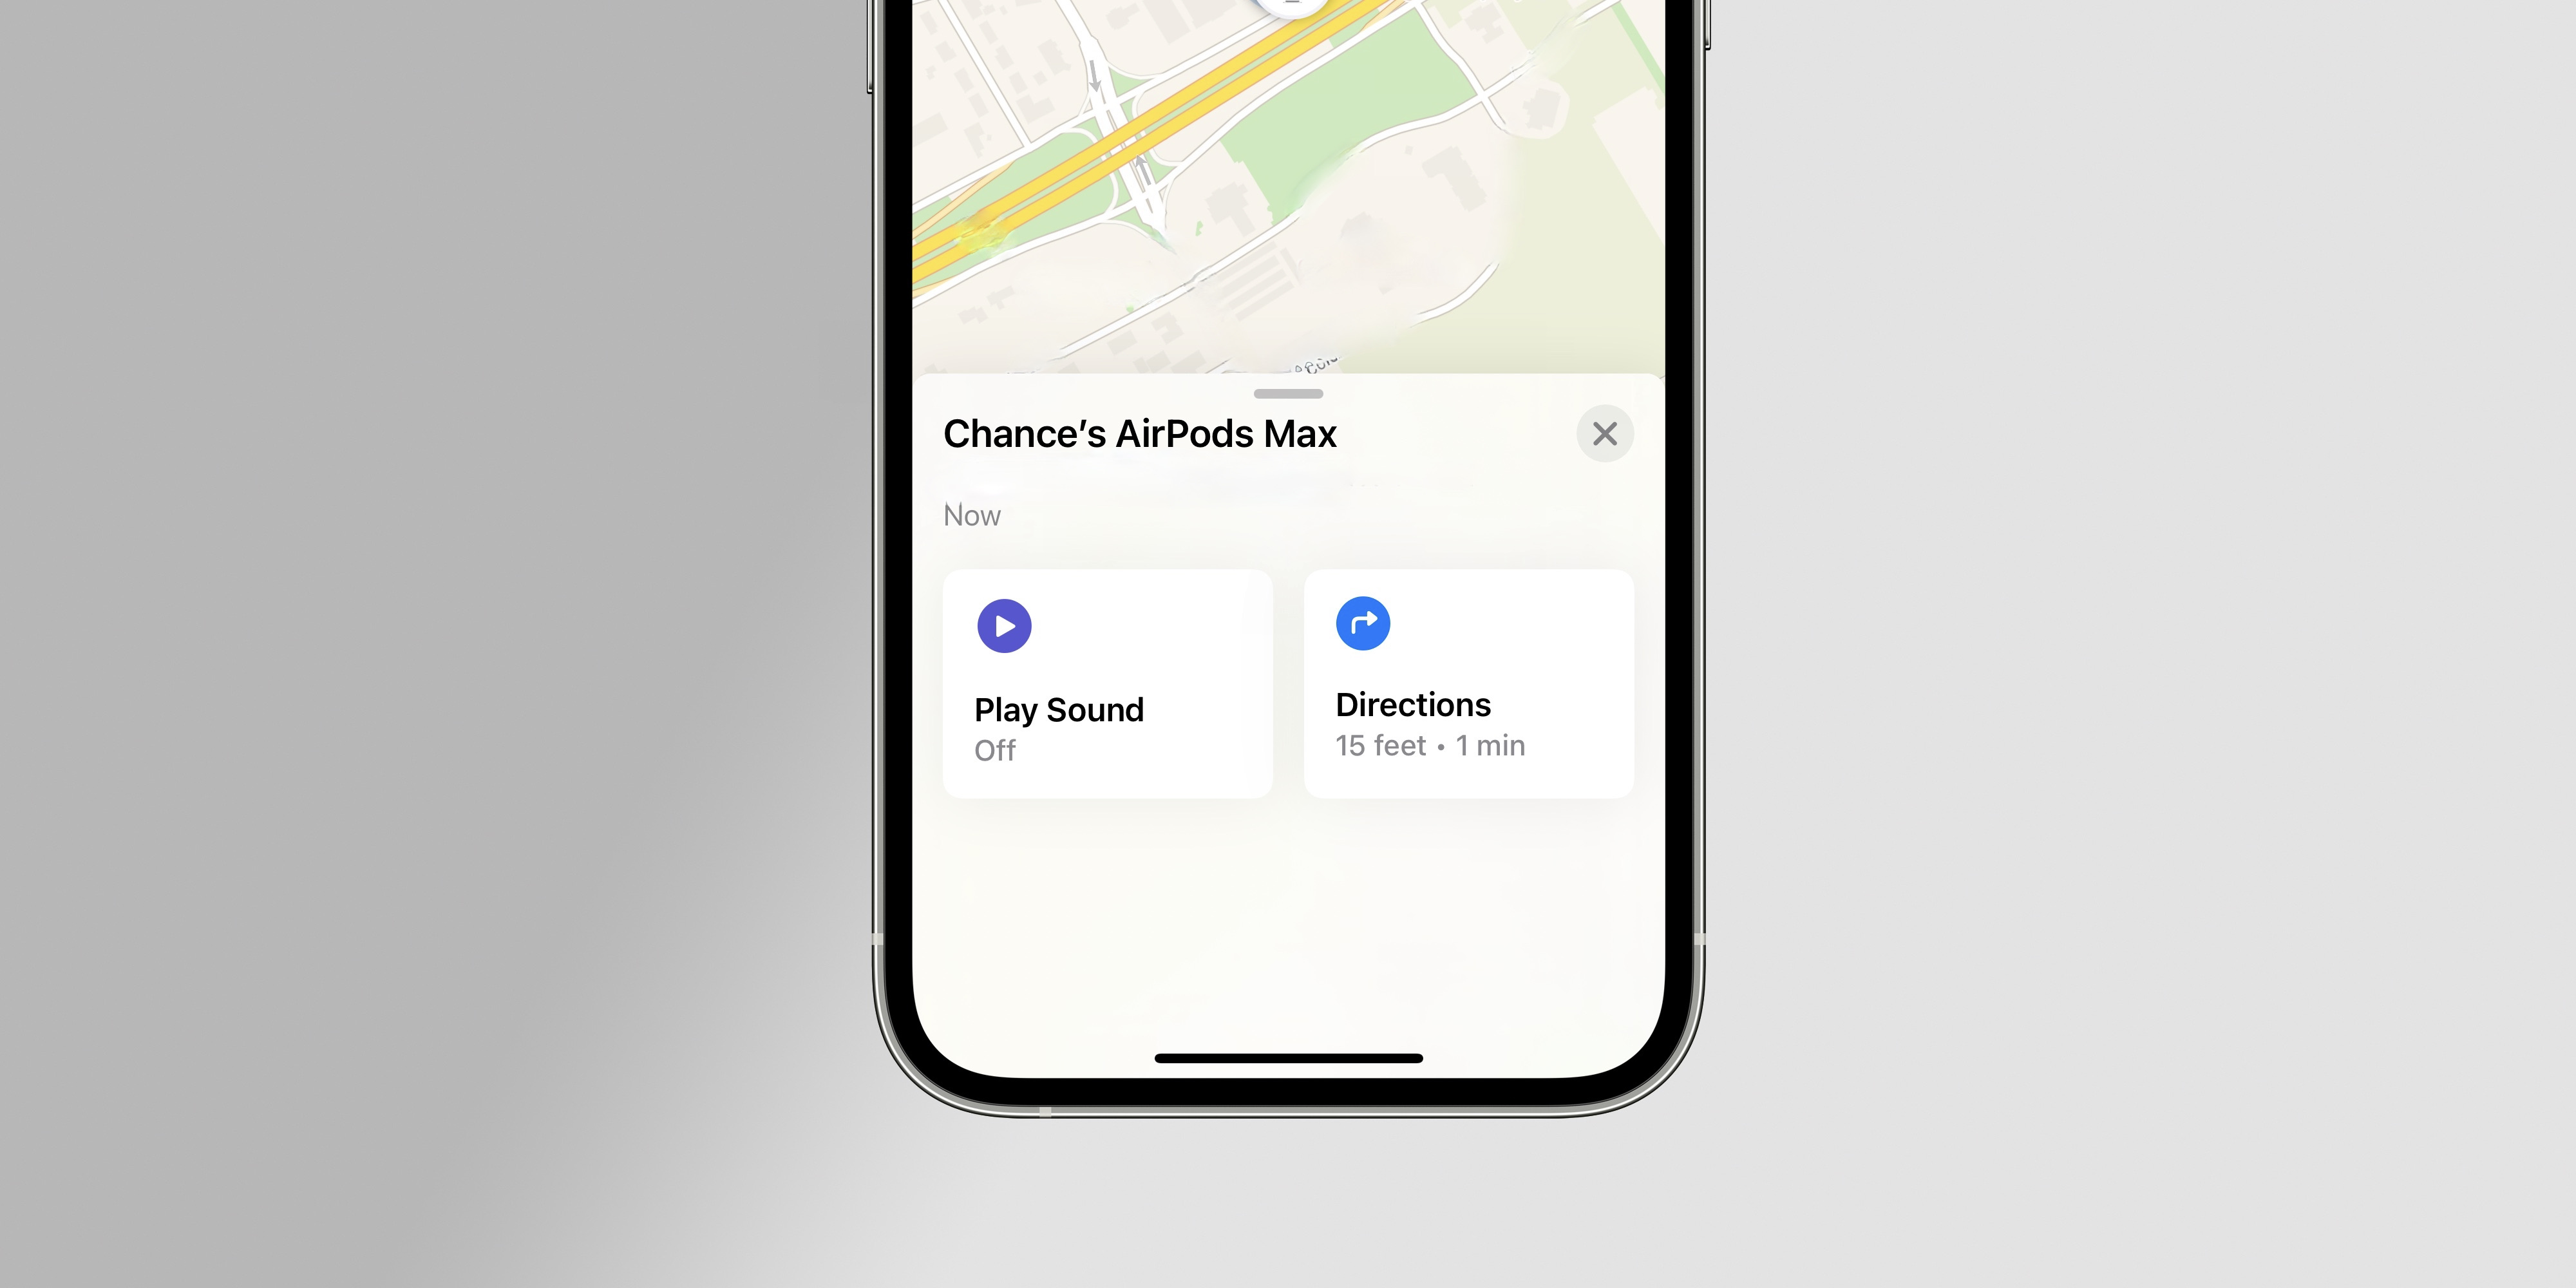 How to use Apples Find My AirPods feature to locate your lost headphones